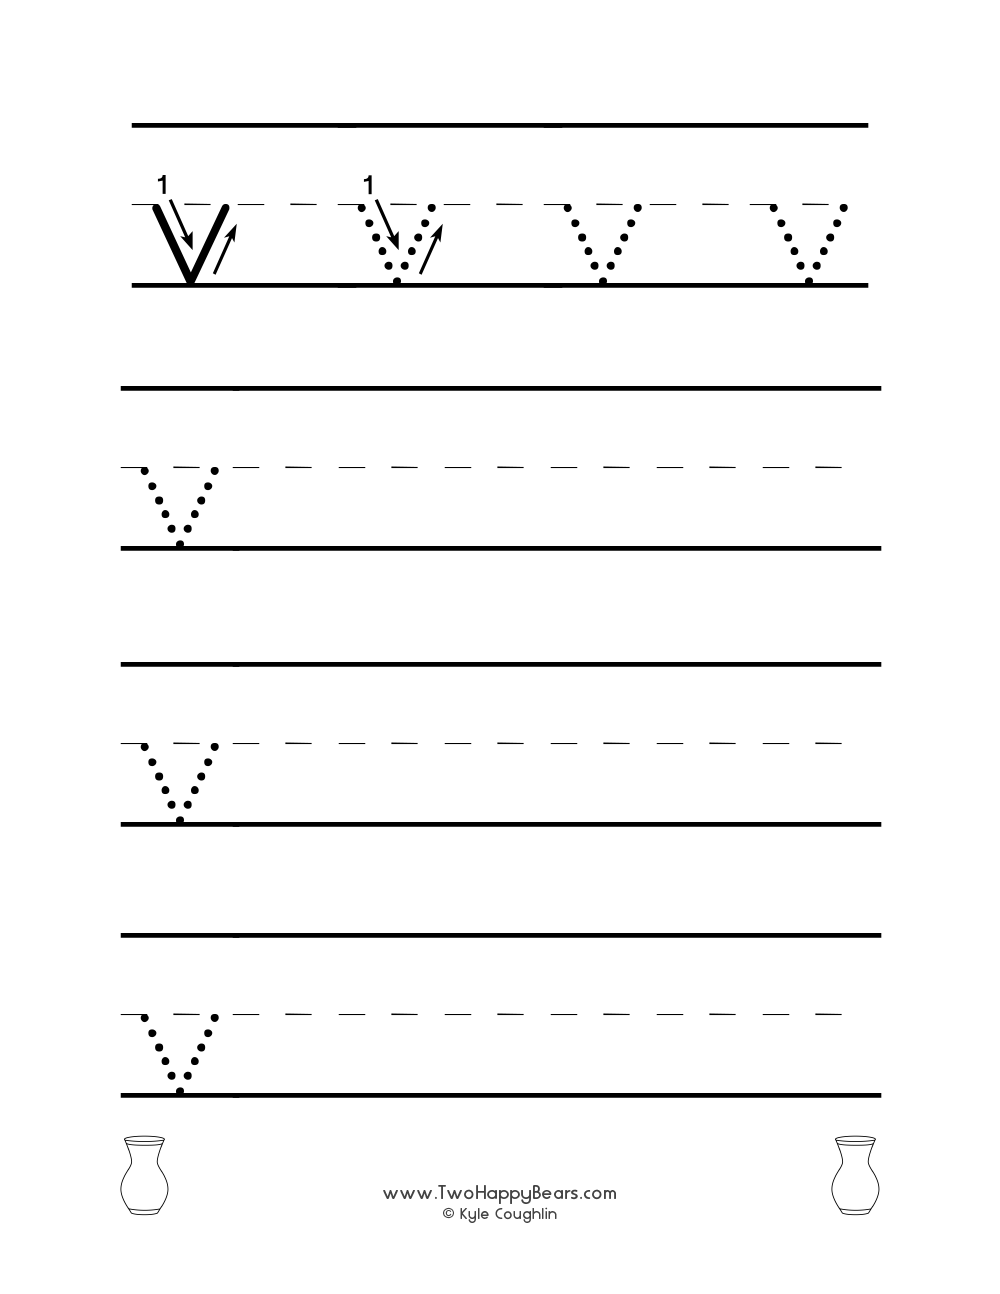 Worksheet for tracing and writing the lowercase letter V, in free printable PDF format.